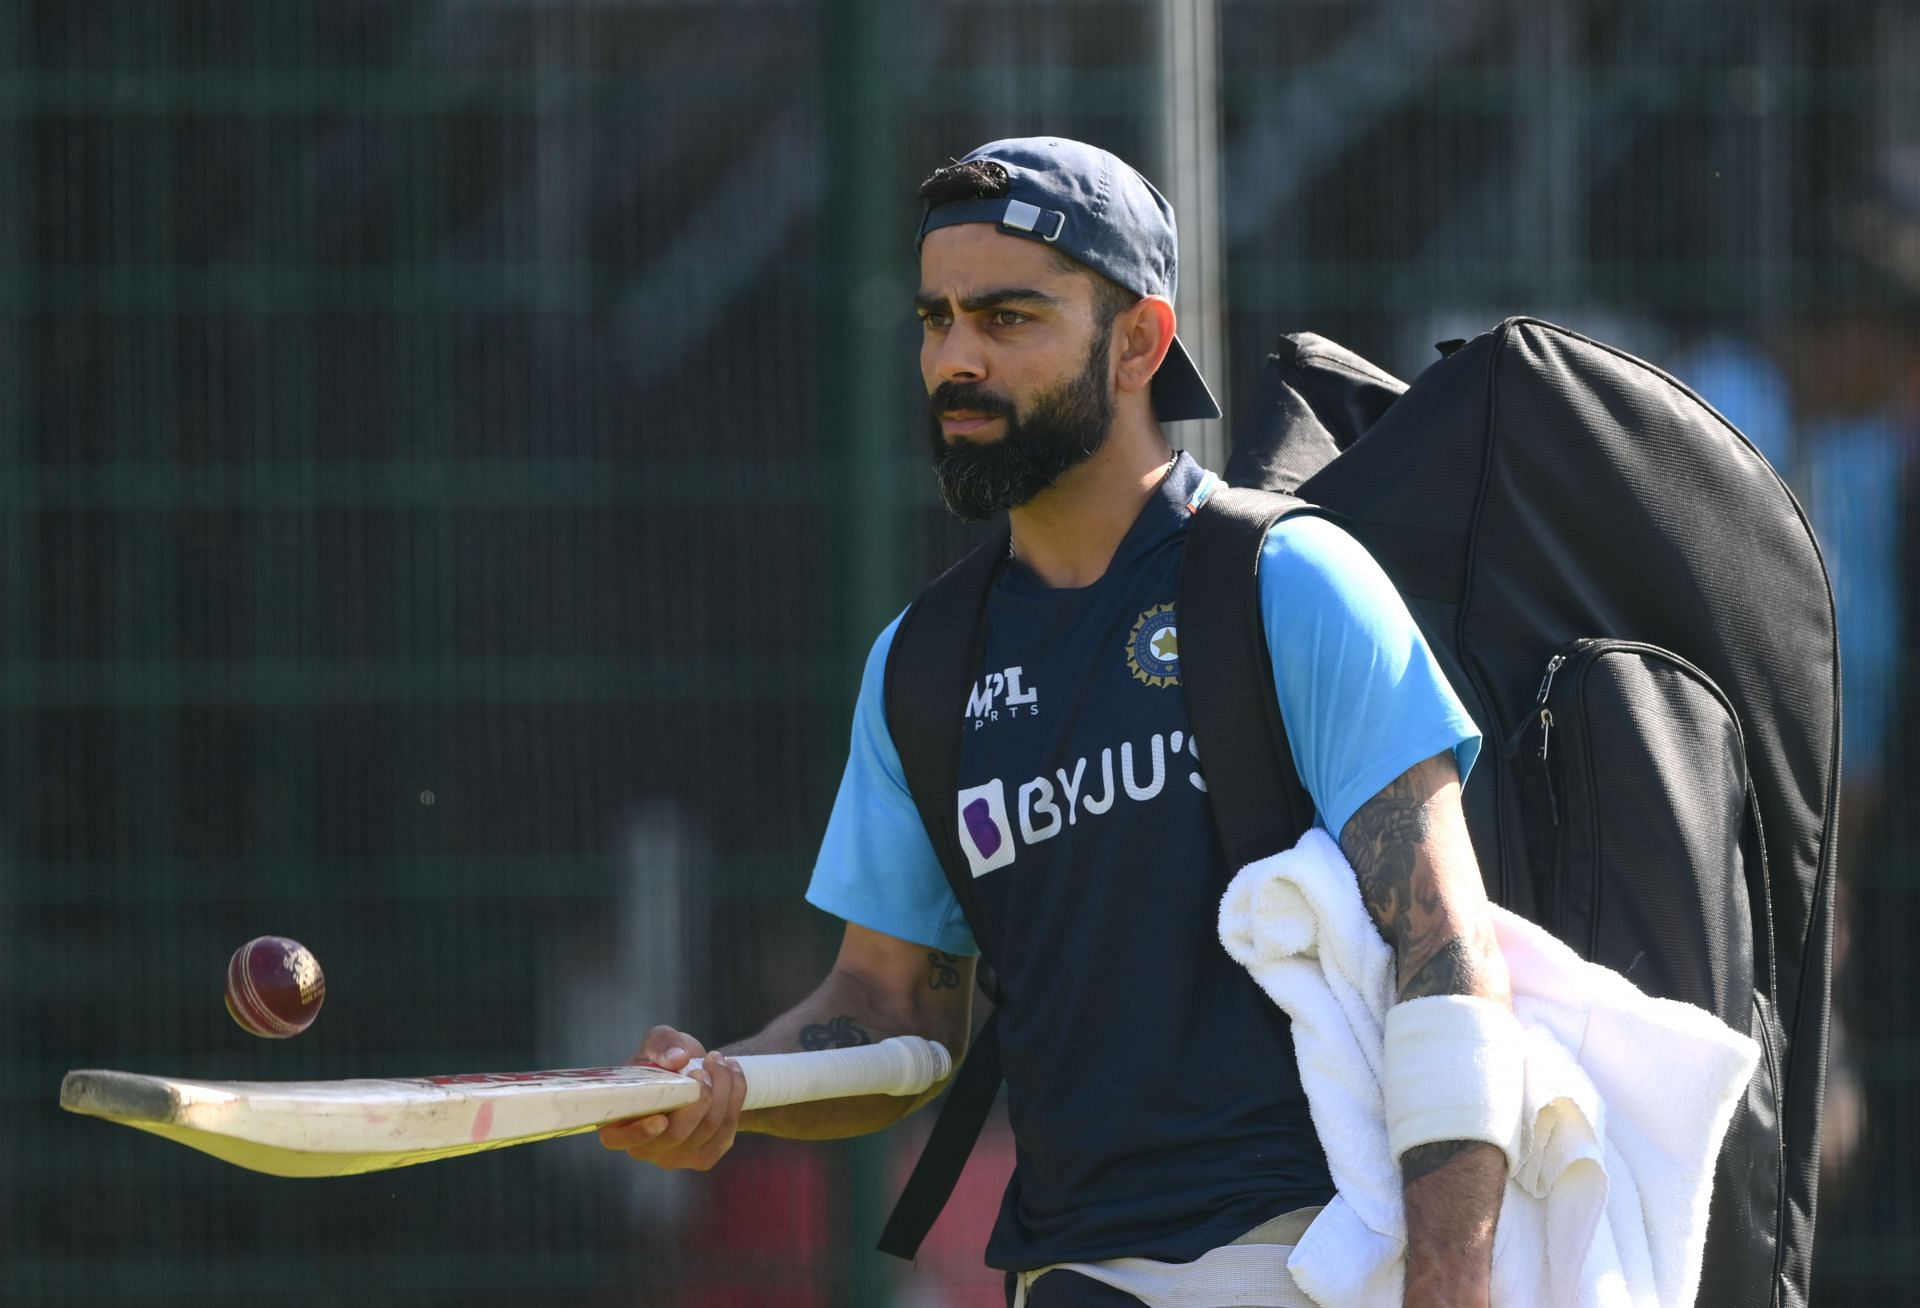 Virat Kohli will not have the burden of captaincy in England this time around